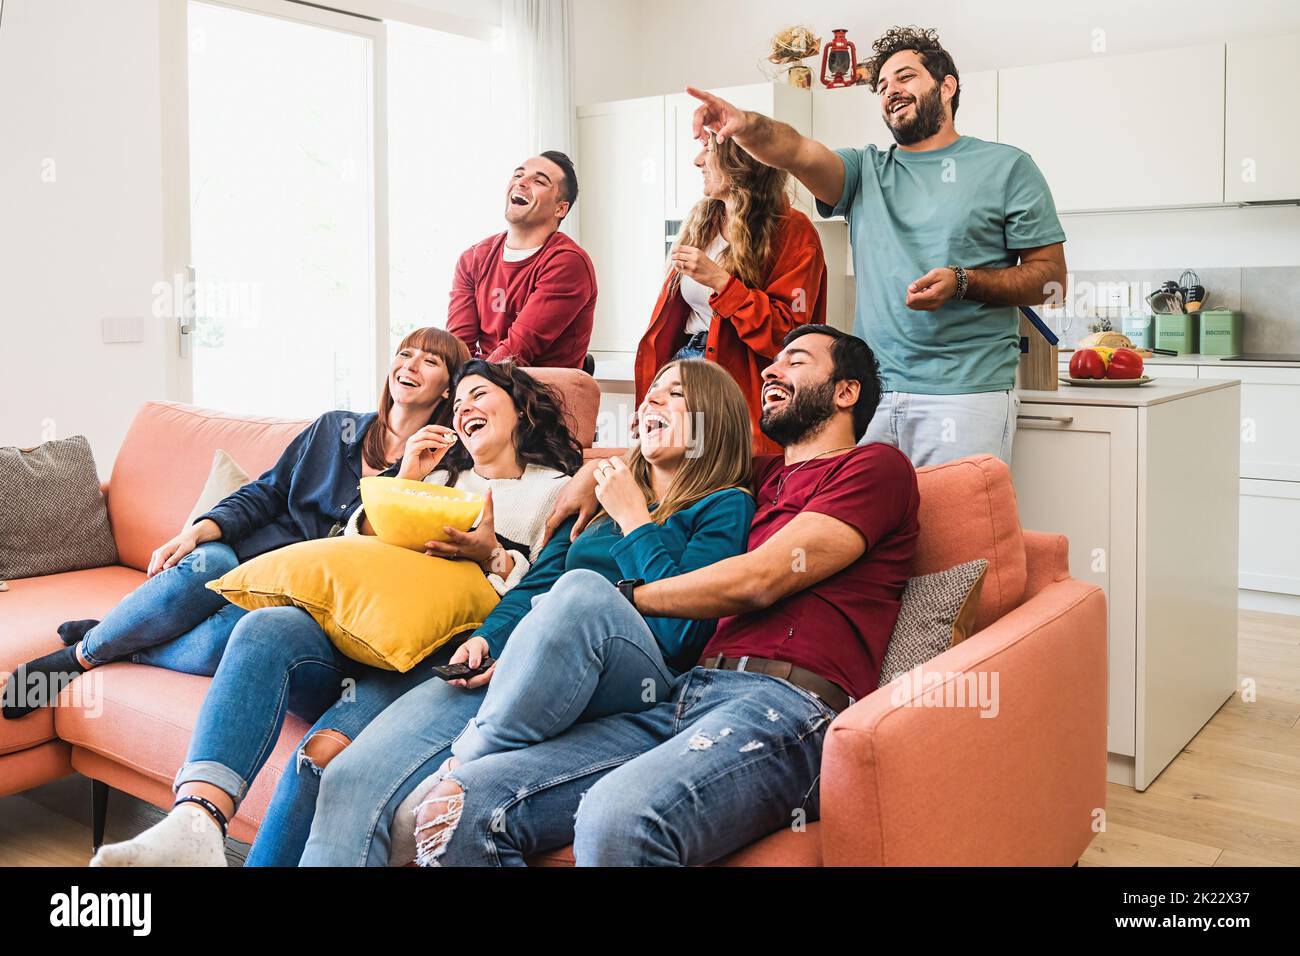 A group of young adults people enjoy watching funny content such as comedy movie on TV while eating popcorn, the bearded guy points on the television Stock Photo